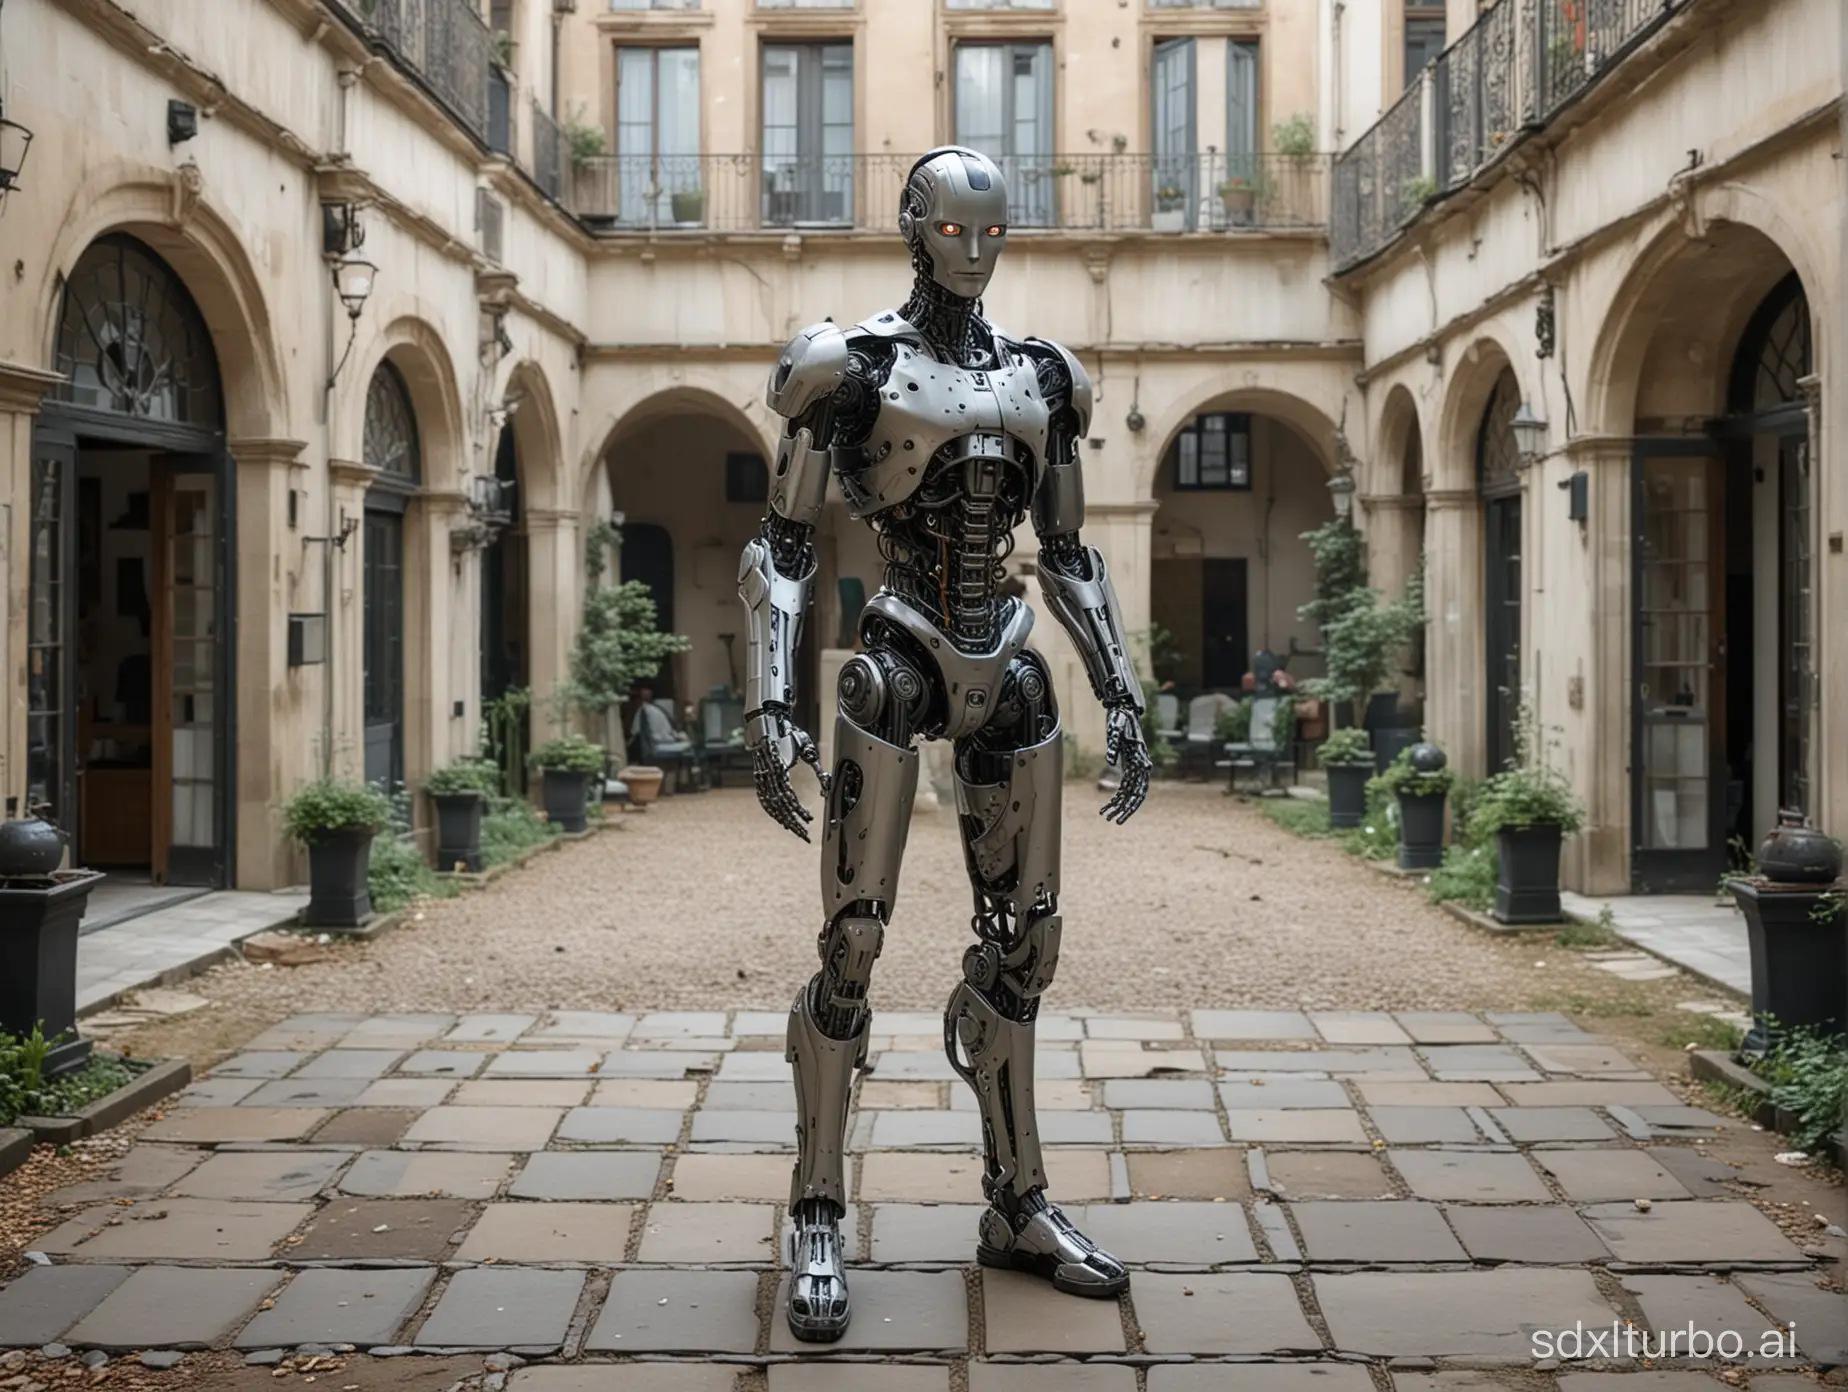 Mechanical-and-Human-Hybrid-Boyfriend-Stands-in-Courtyard